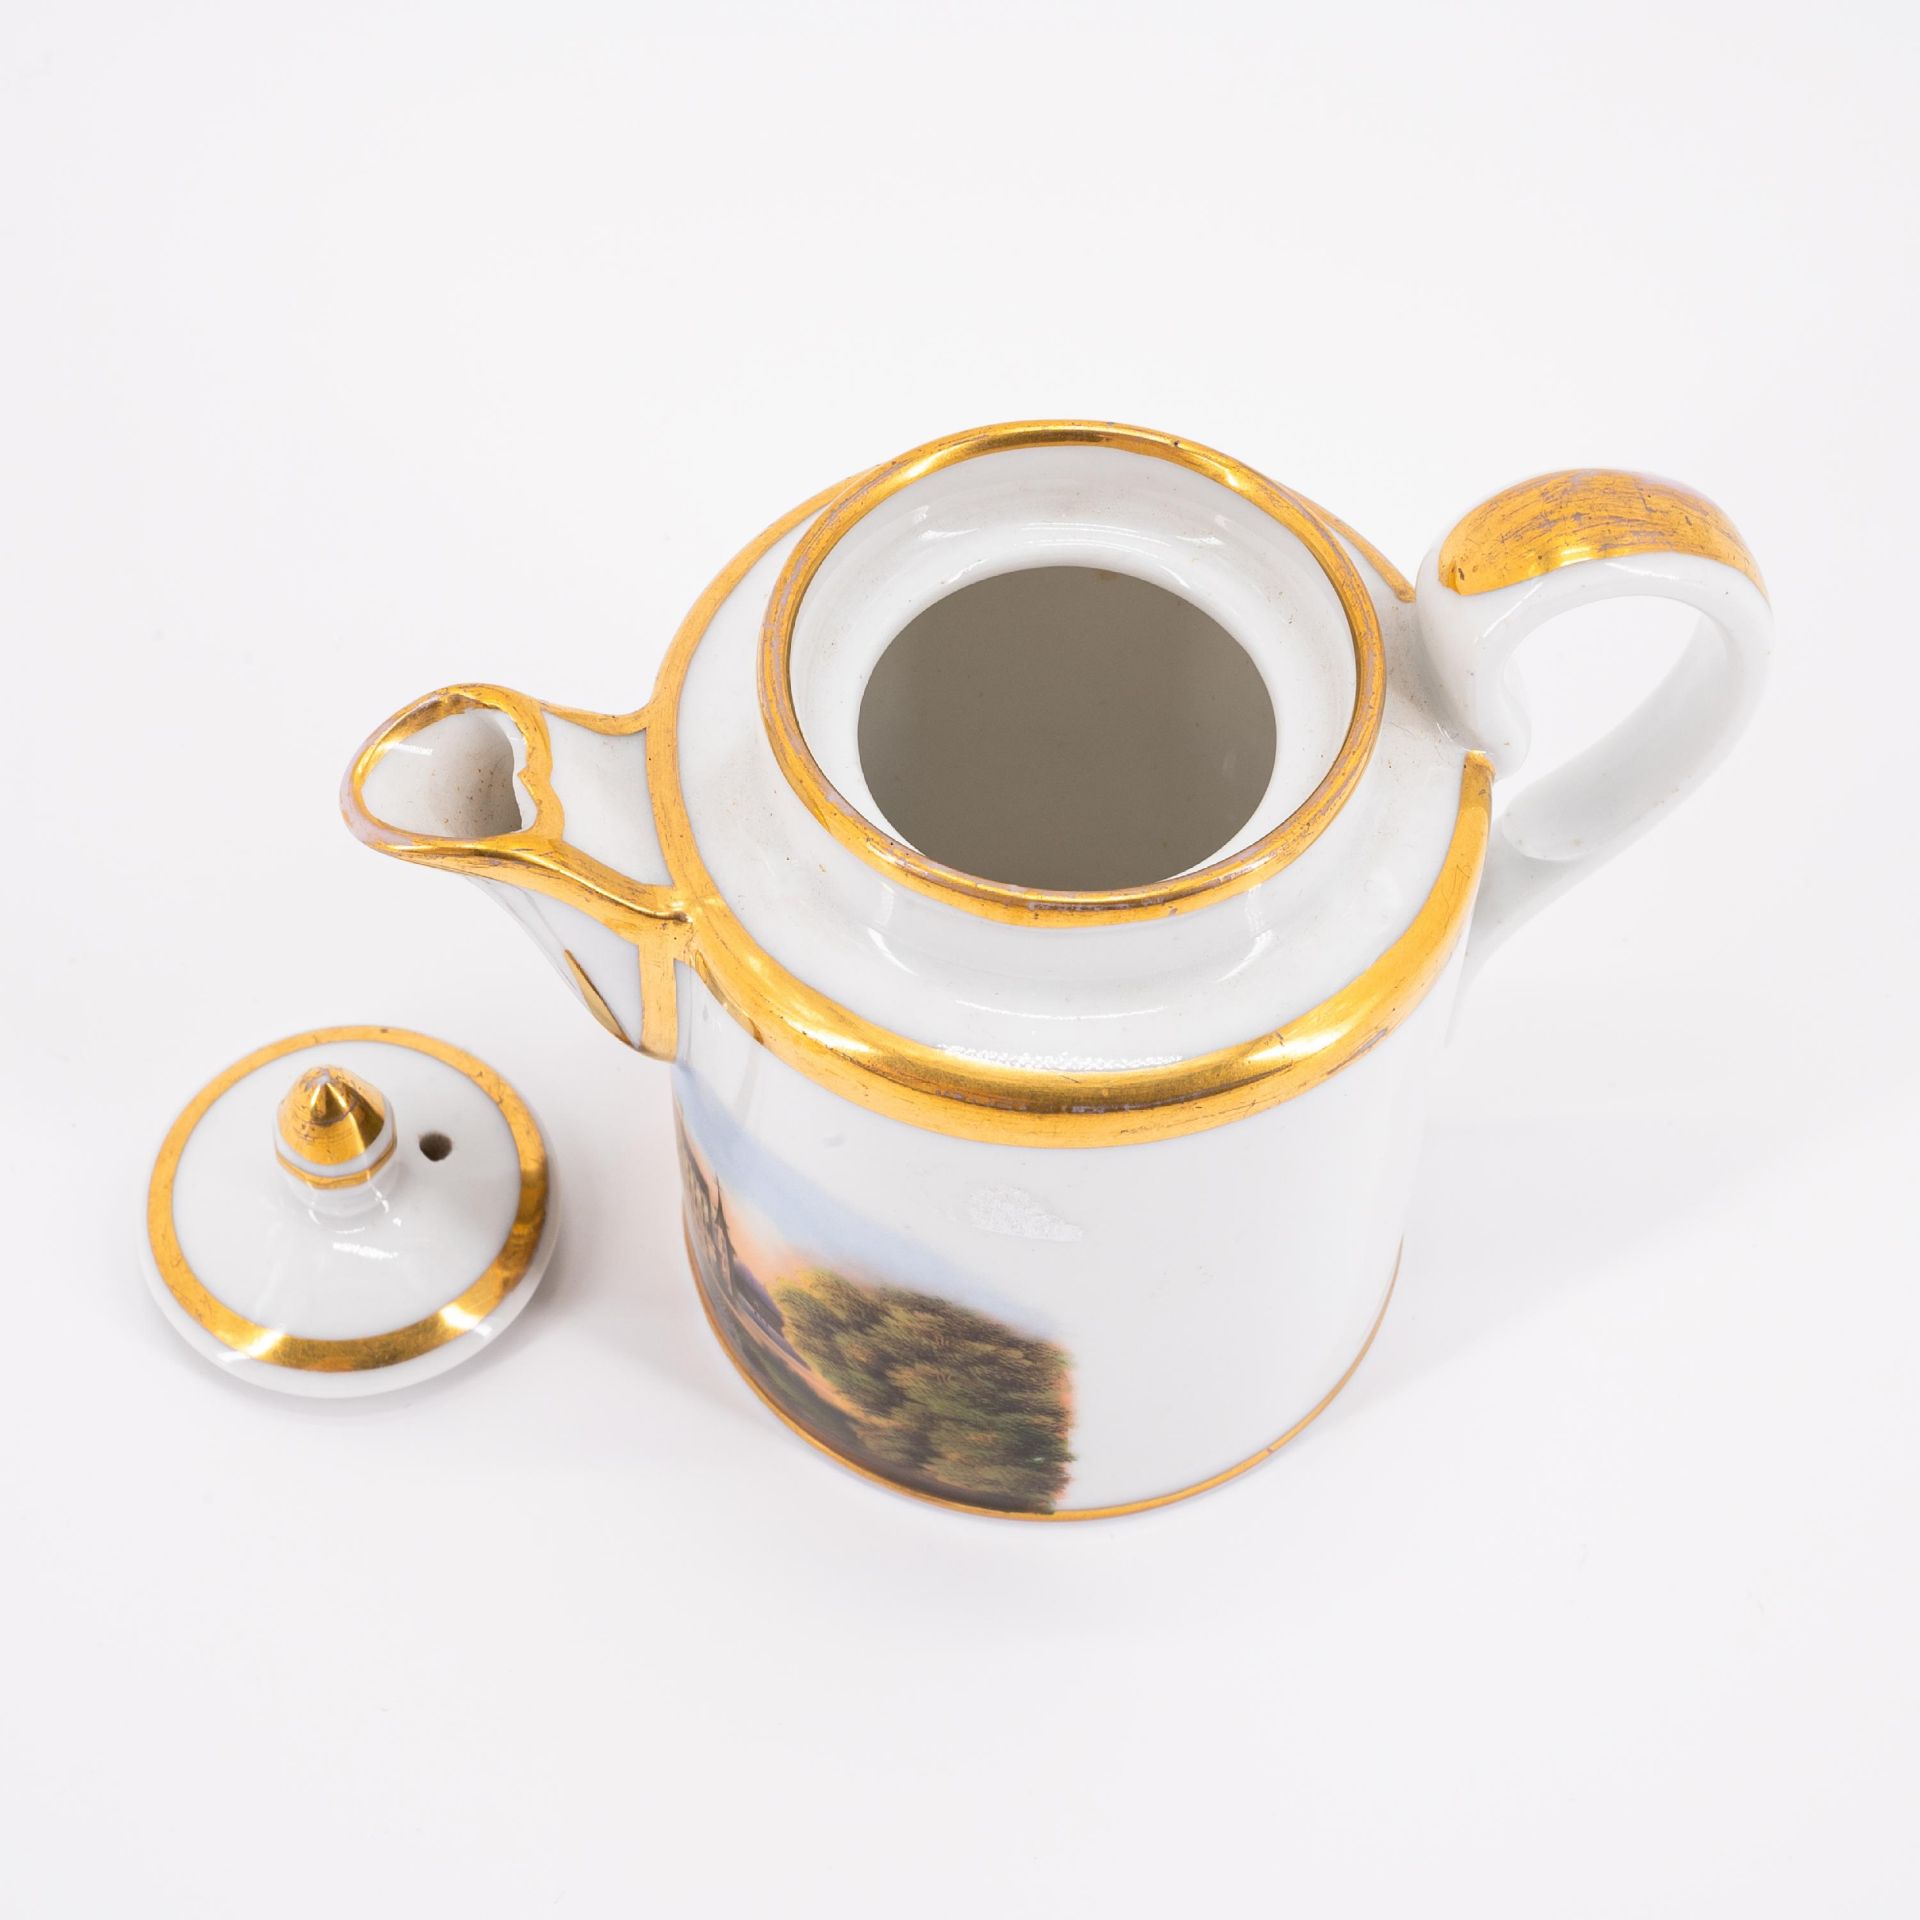 ENSEMBLE OF A PORCELAIN MINIATURE SERVICE WITH GILT EDGING AND MINIATURE COFFEE SERVICE WITH LANDSCA - Image 12 of 13